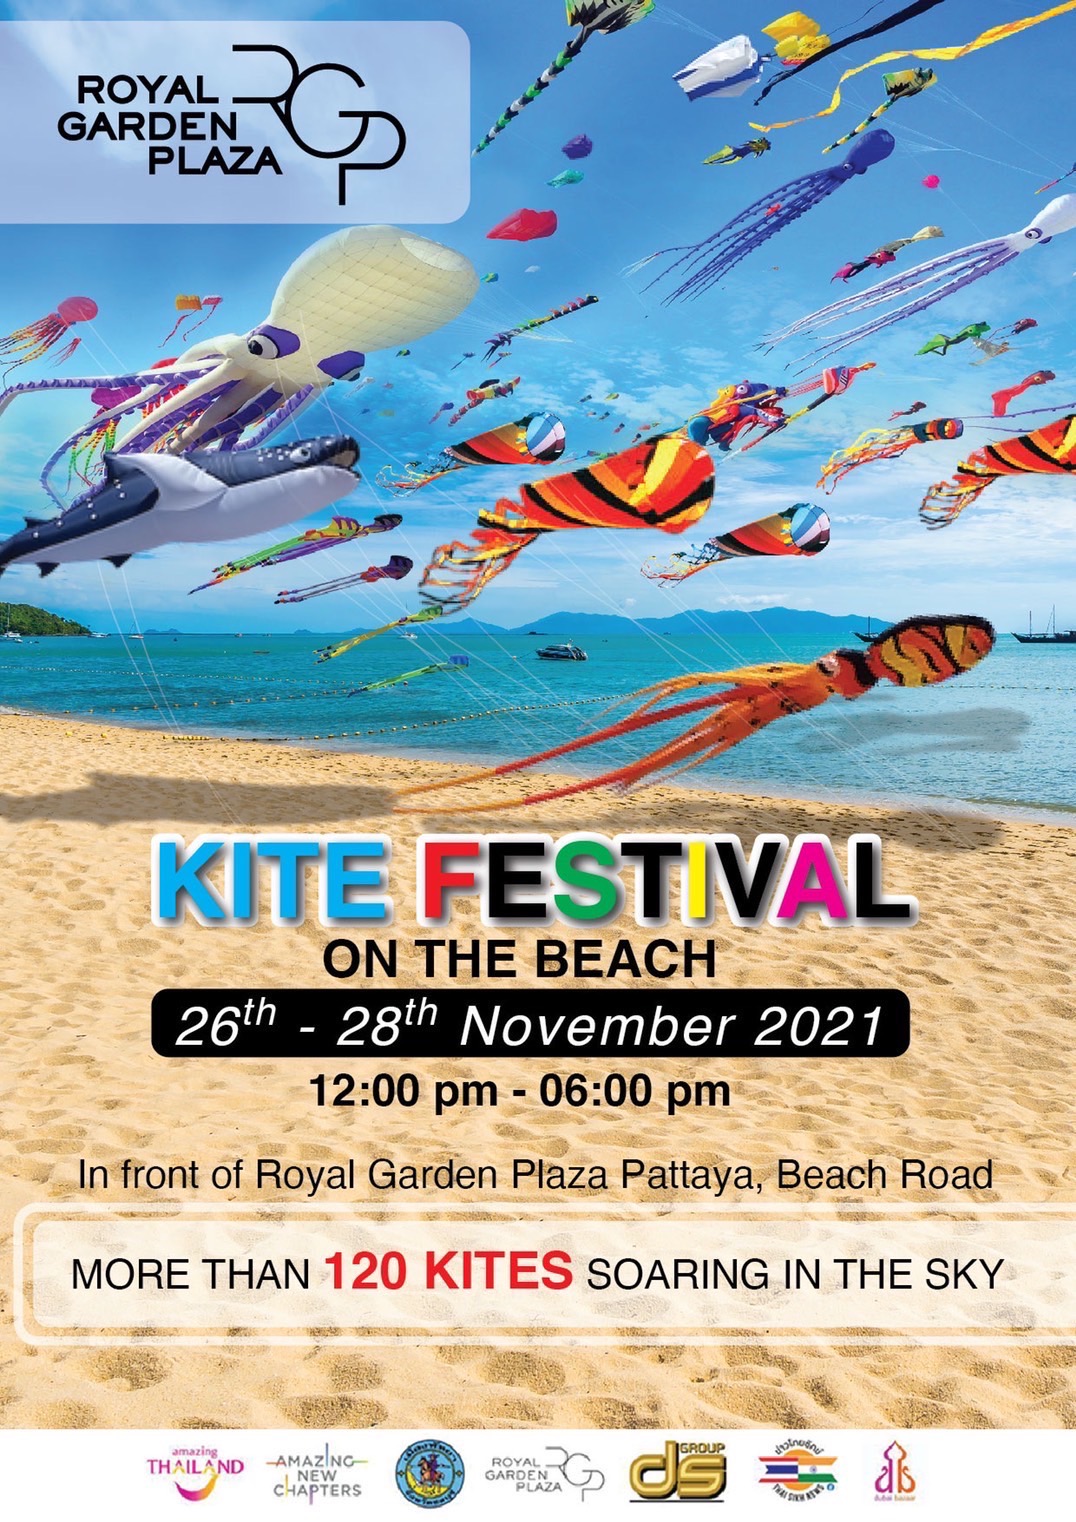 Pattaya to hold Kite Festival on the Beach this weekend, starting today